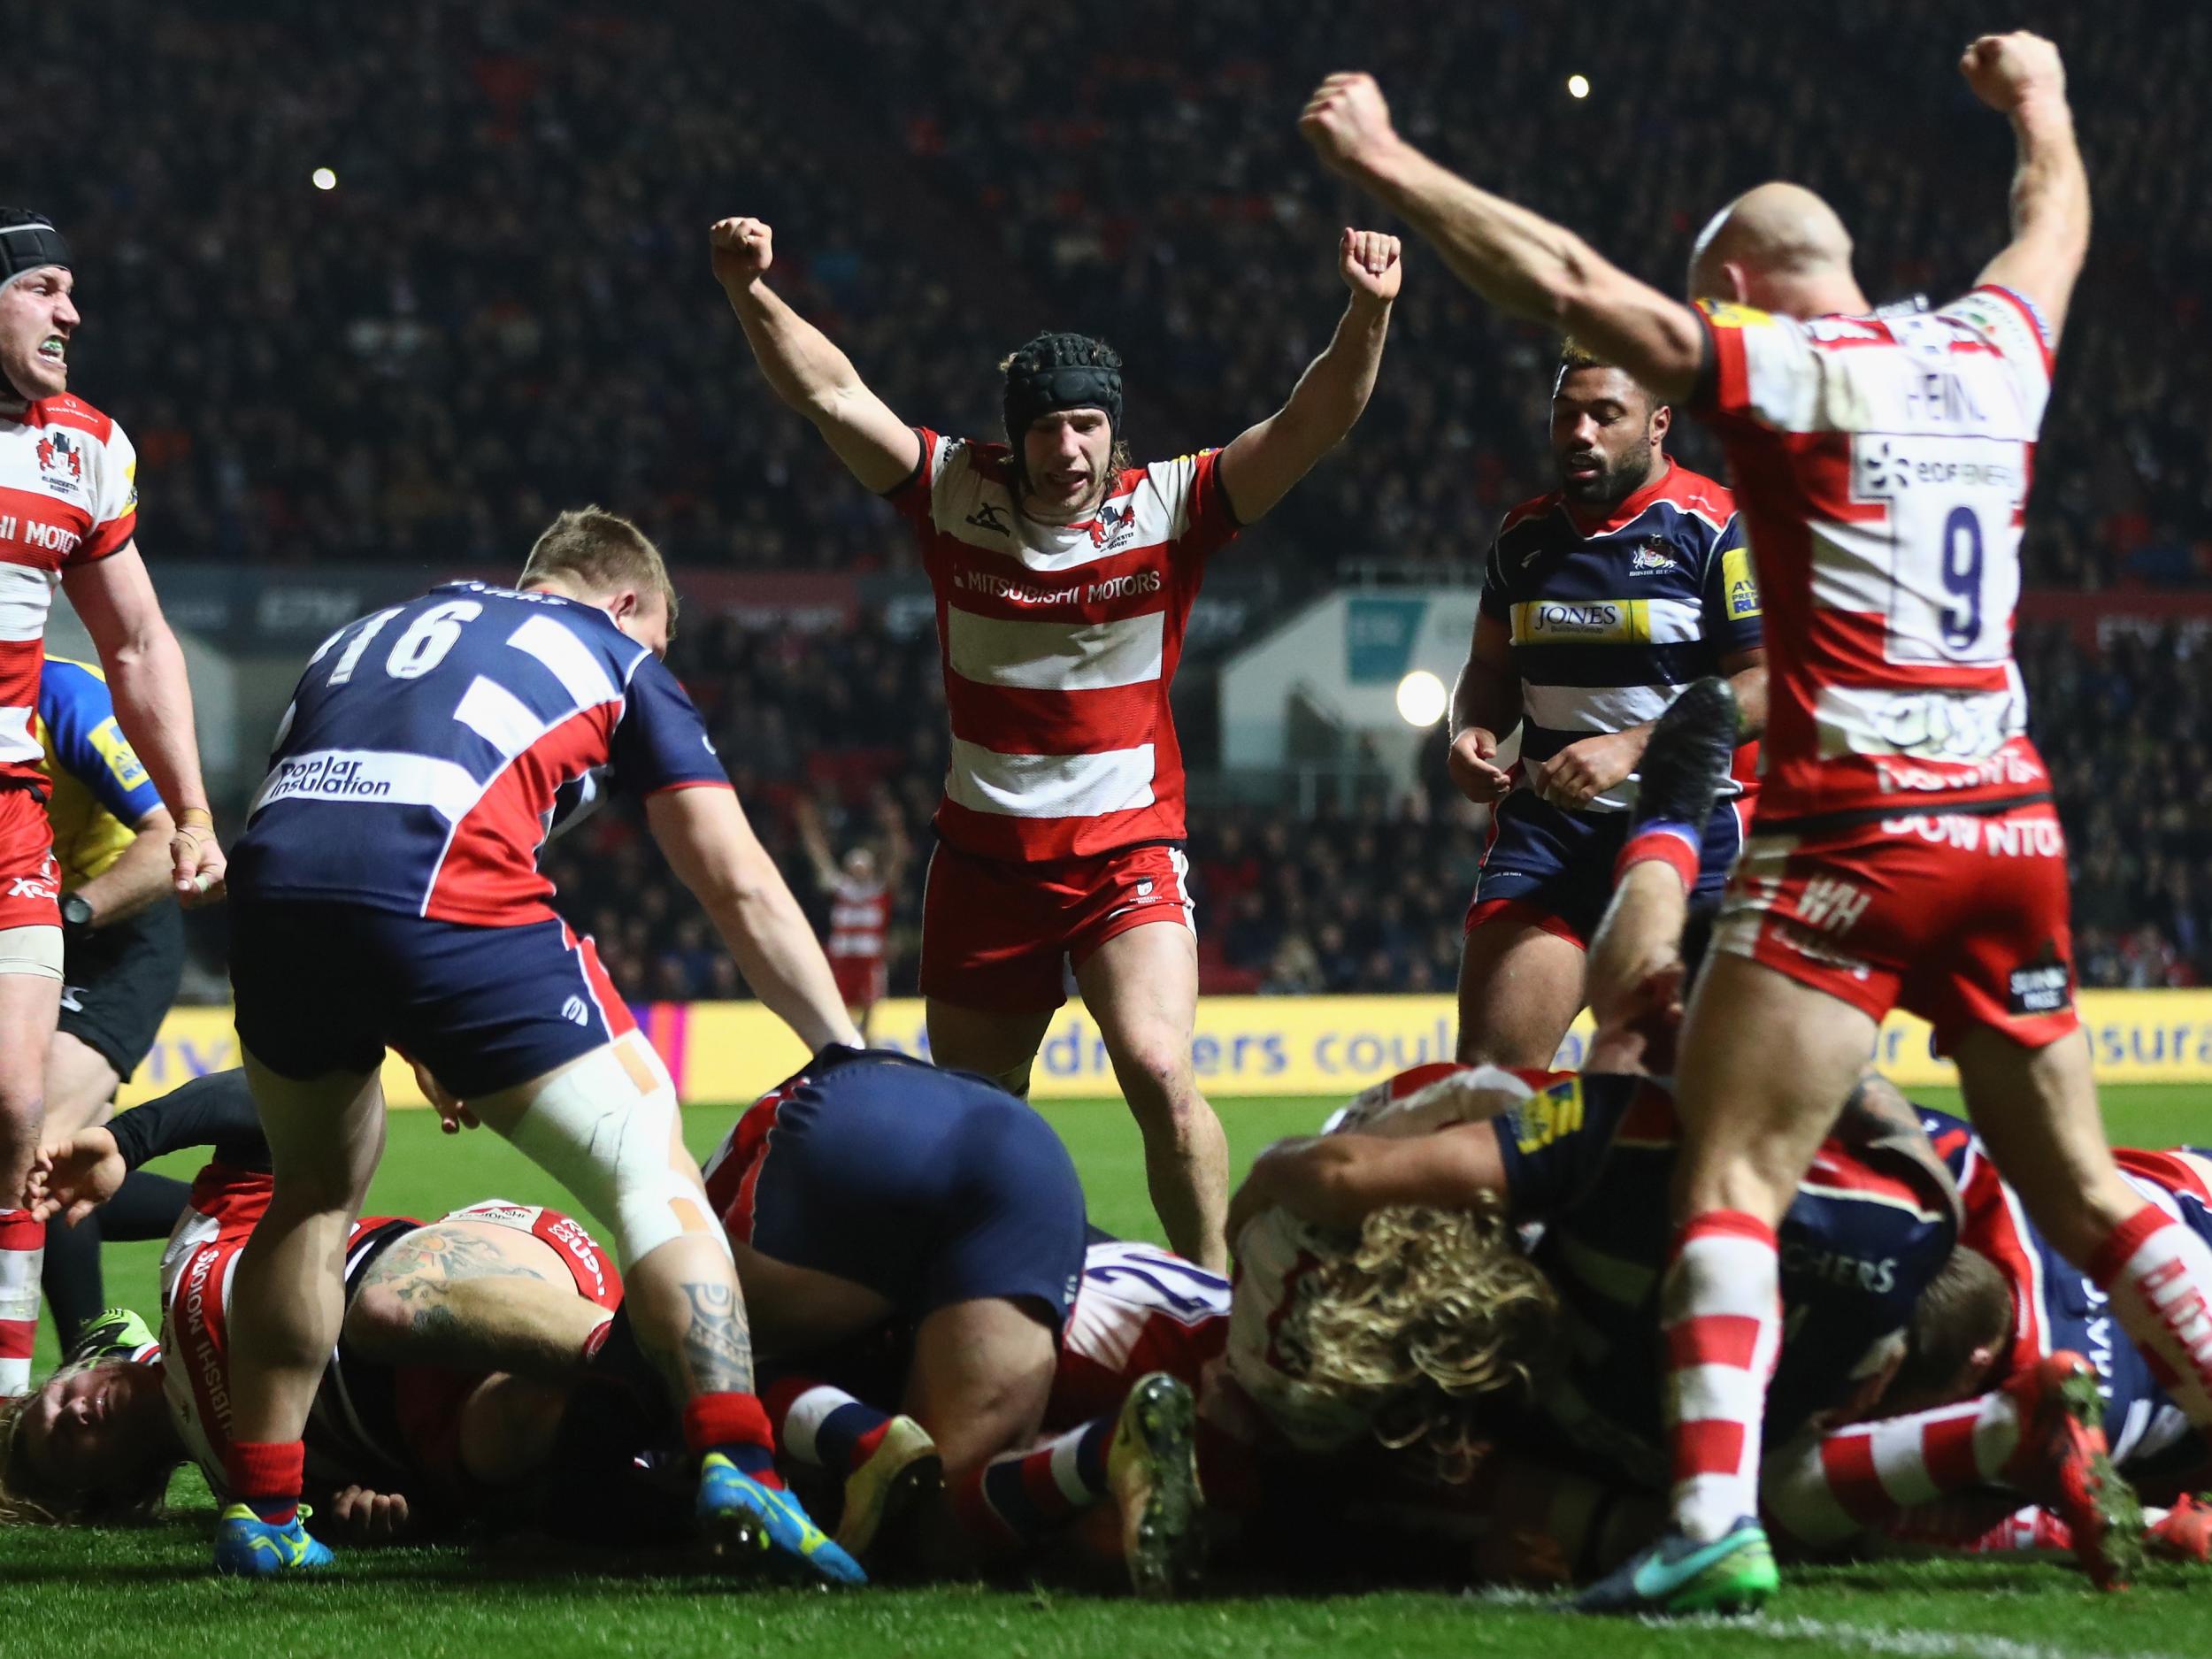 Ludlow crashes over for Gloucester